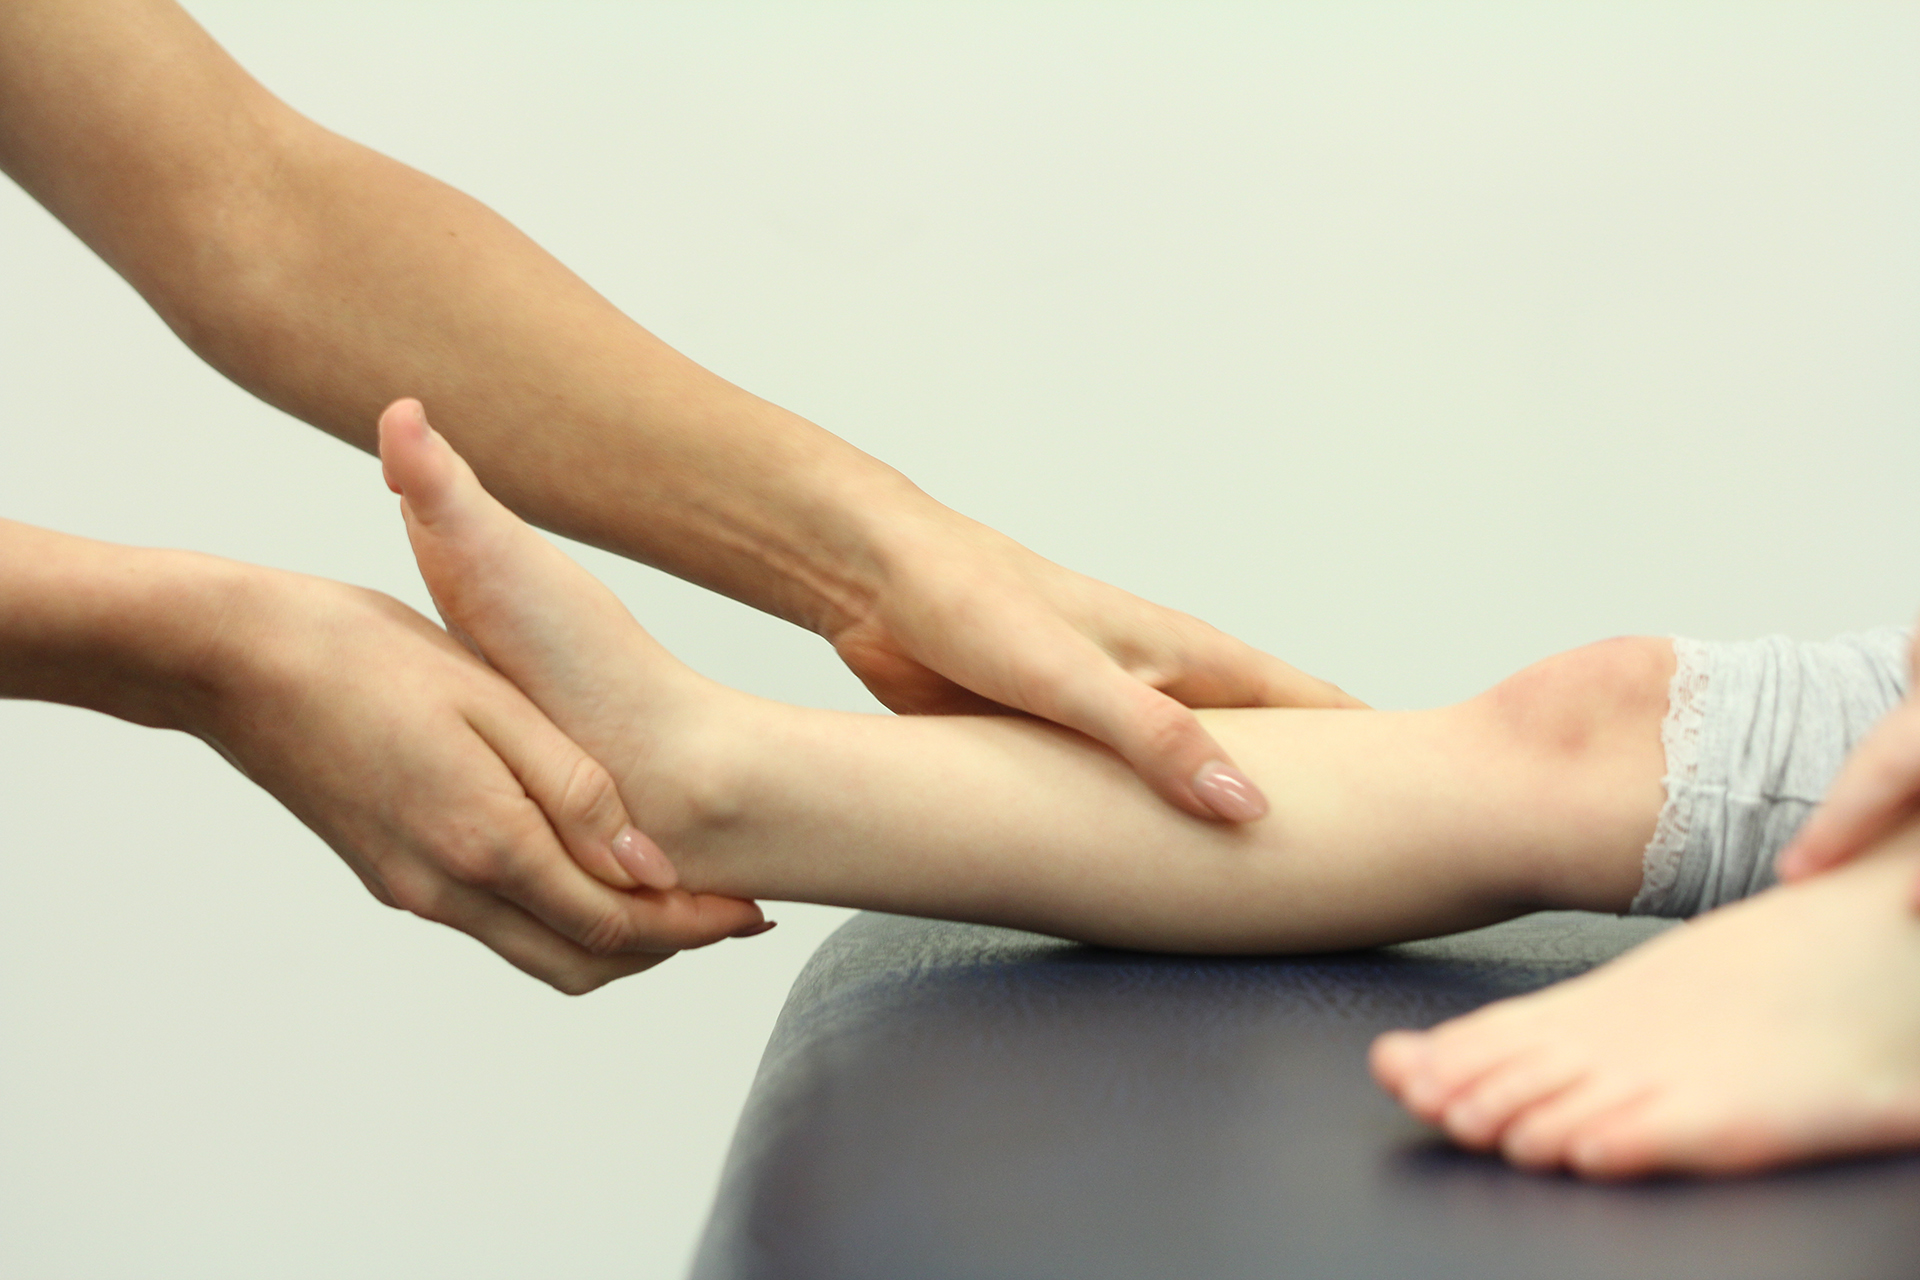 Improve The Mobility of Your Child Though Pediatric Foot Care